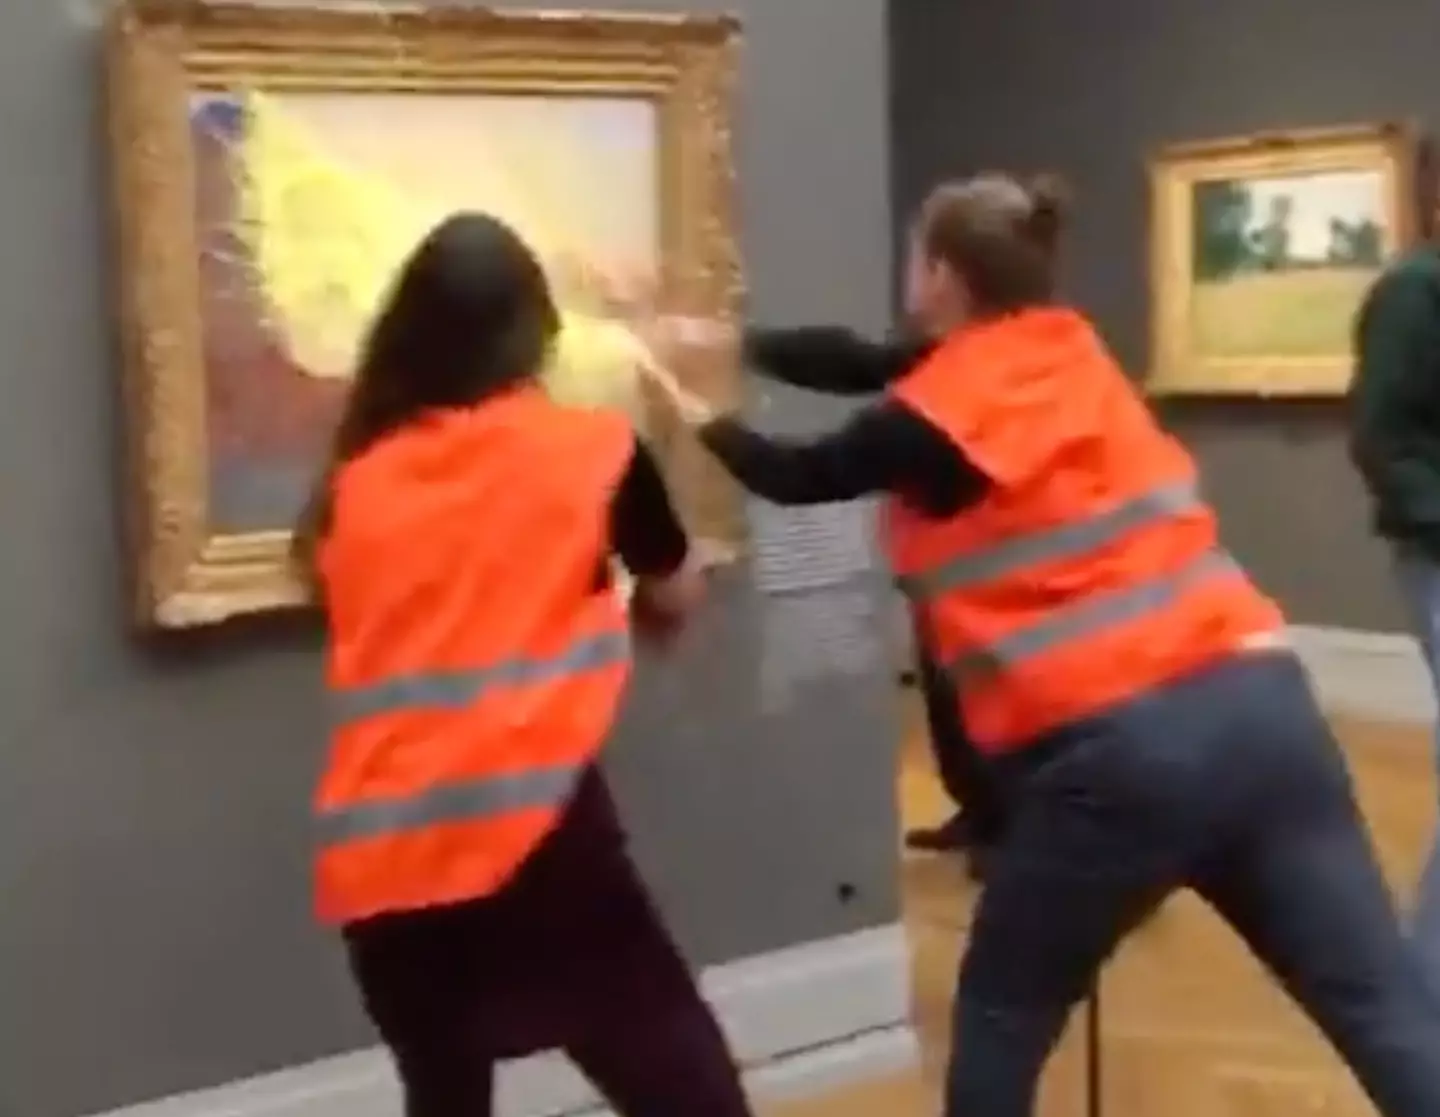 Climate change protesters hurled mashed potato at a Claude Monet painting.